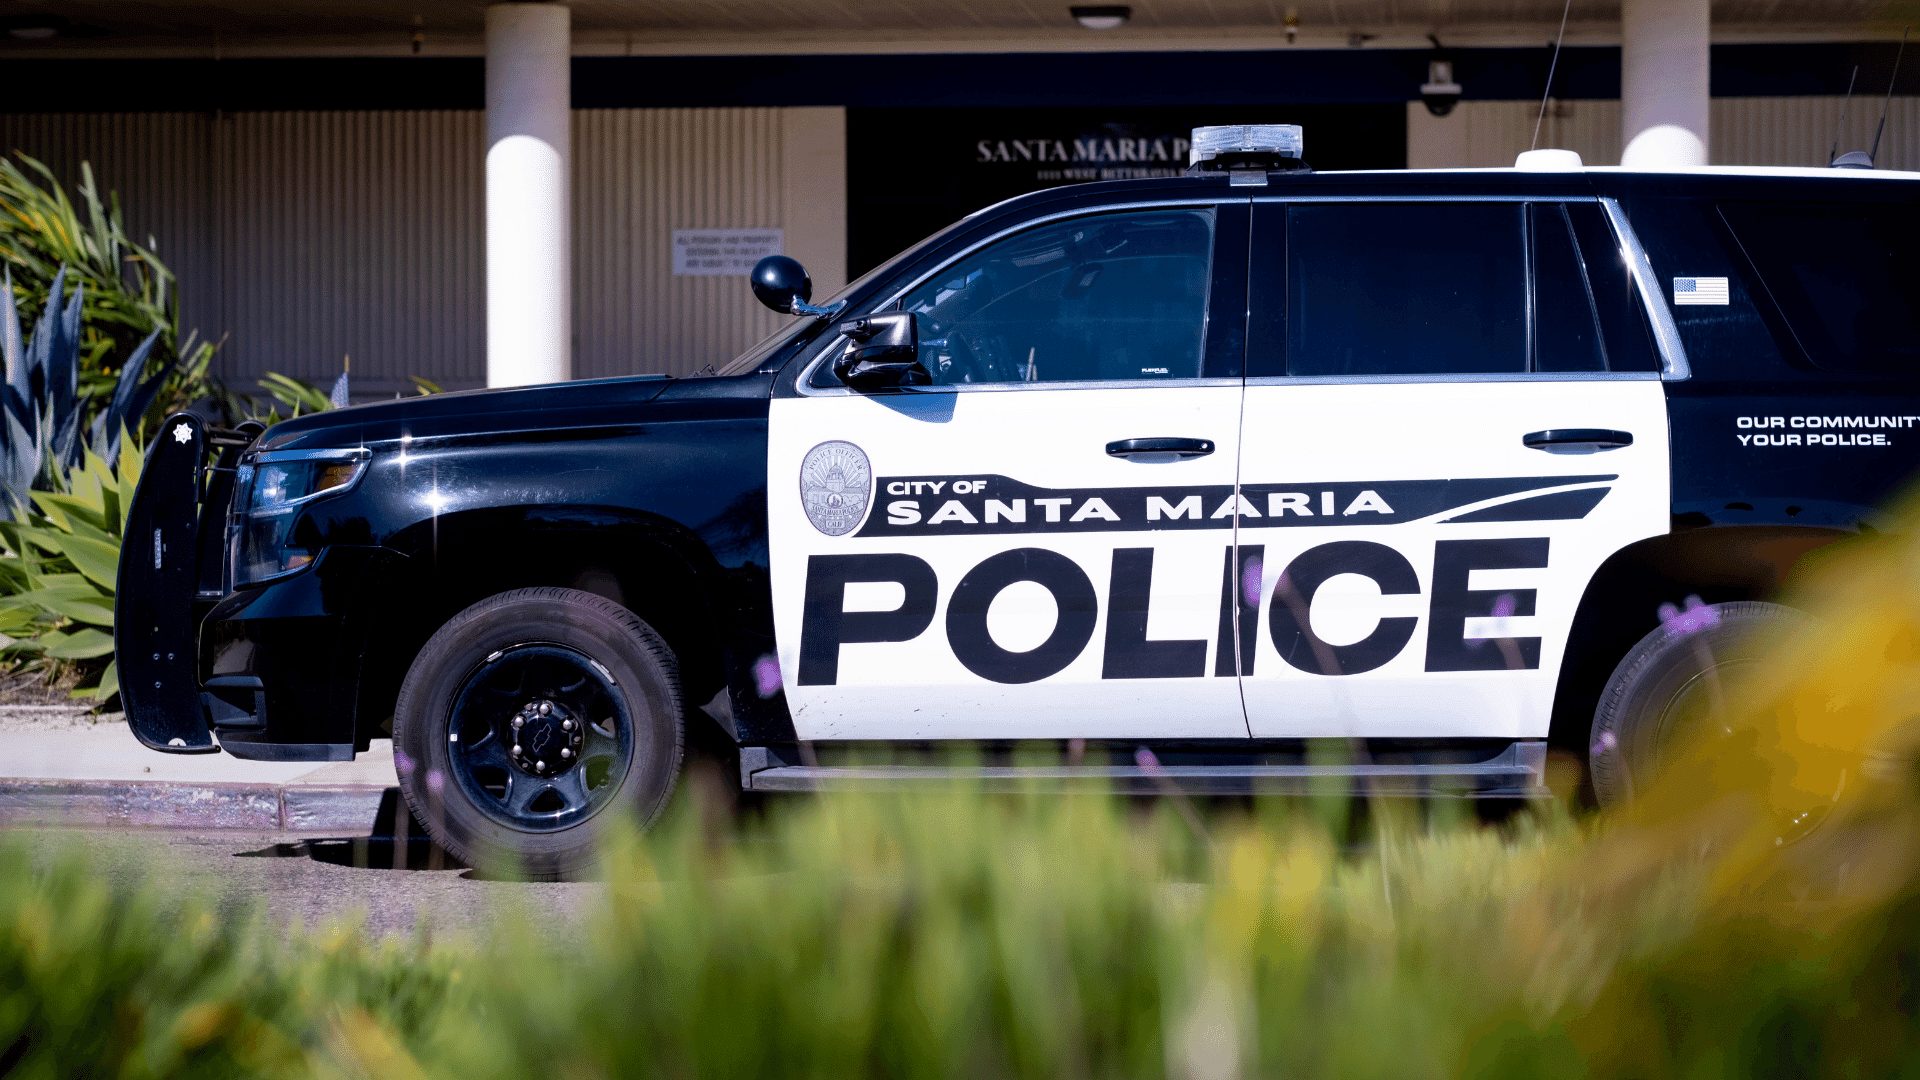 A black and white Santa Maria Police SUV parked in front of Santa Maria Police Department